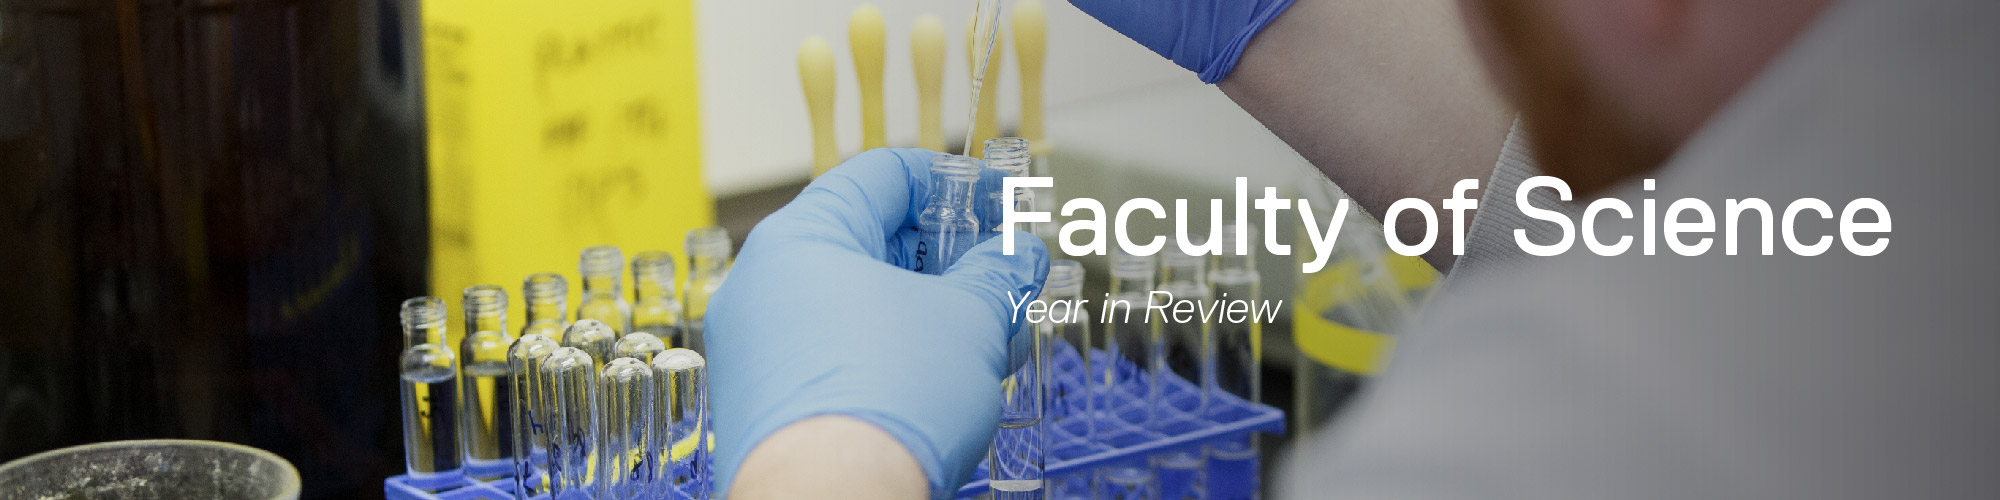 Faculty of Science Year in Review